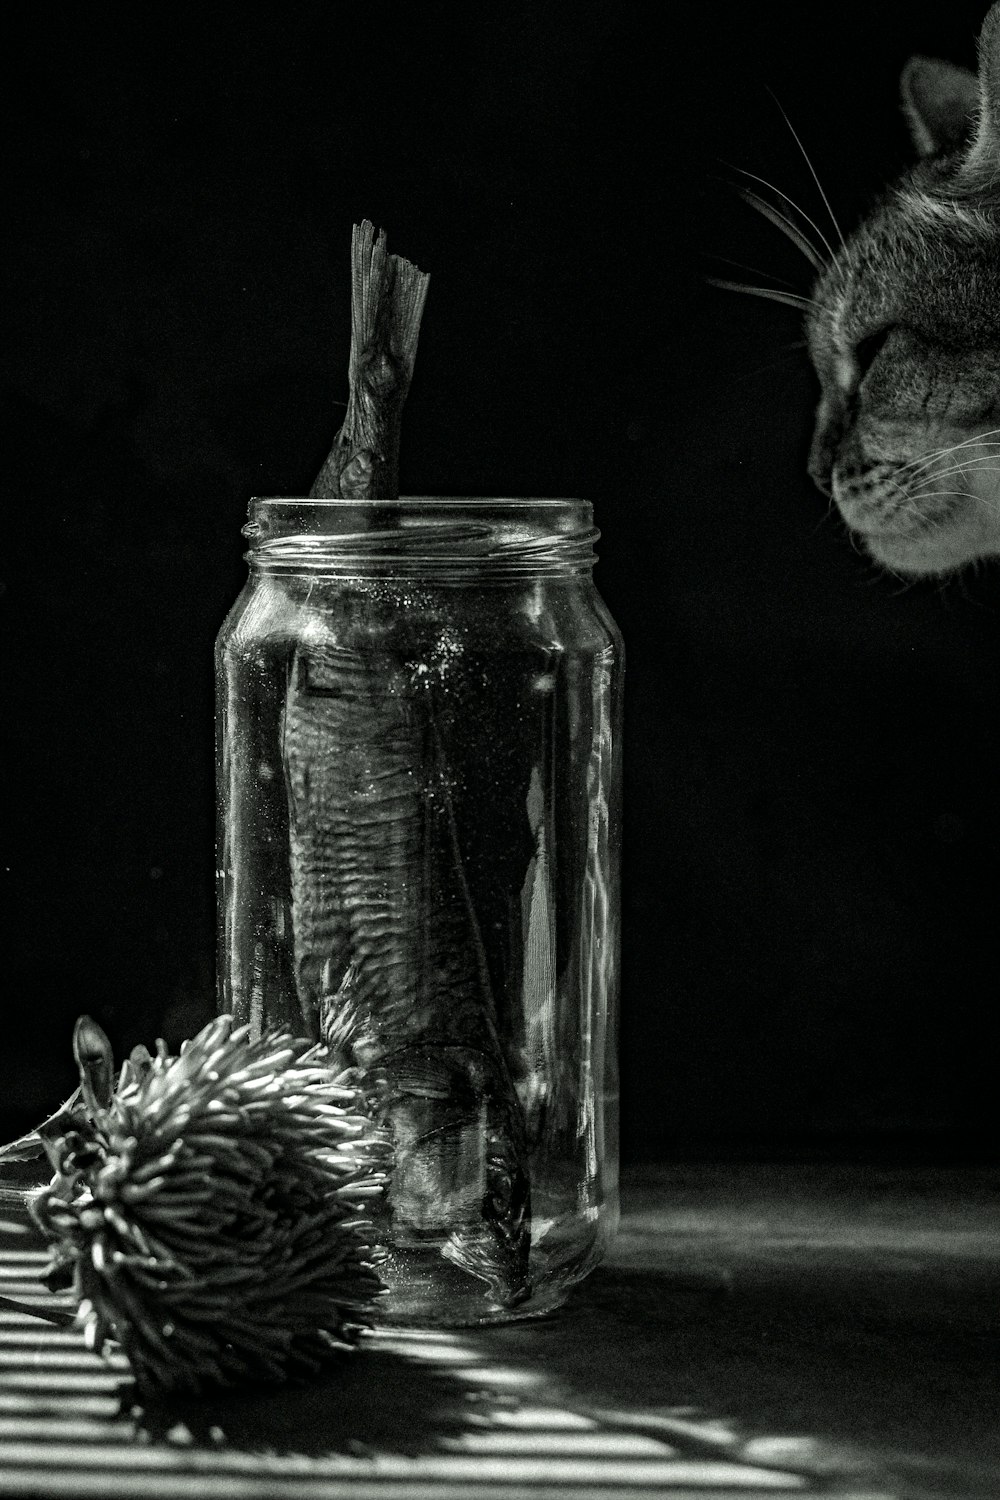 clear glass jar with silver tabby cat